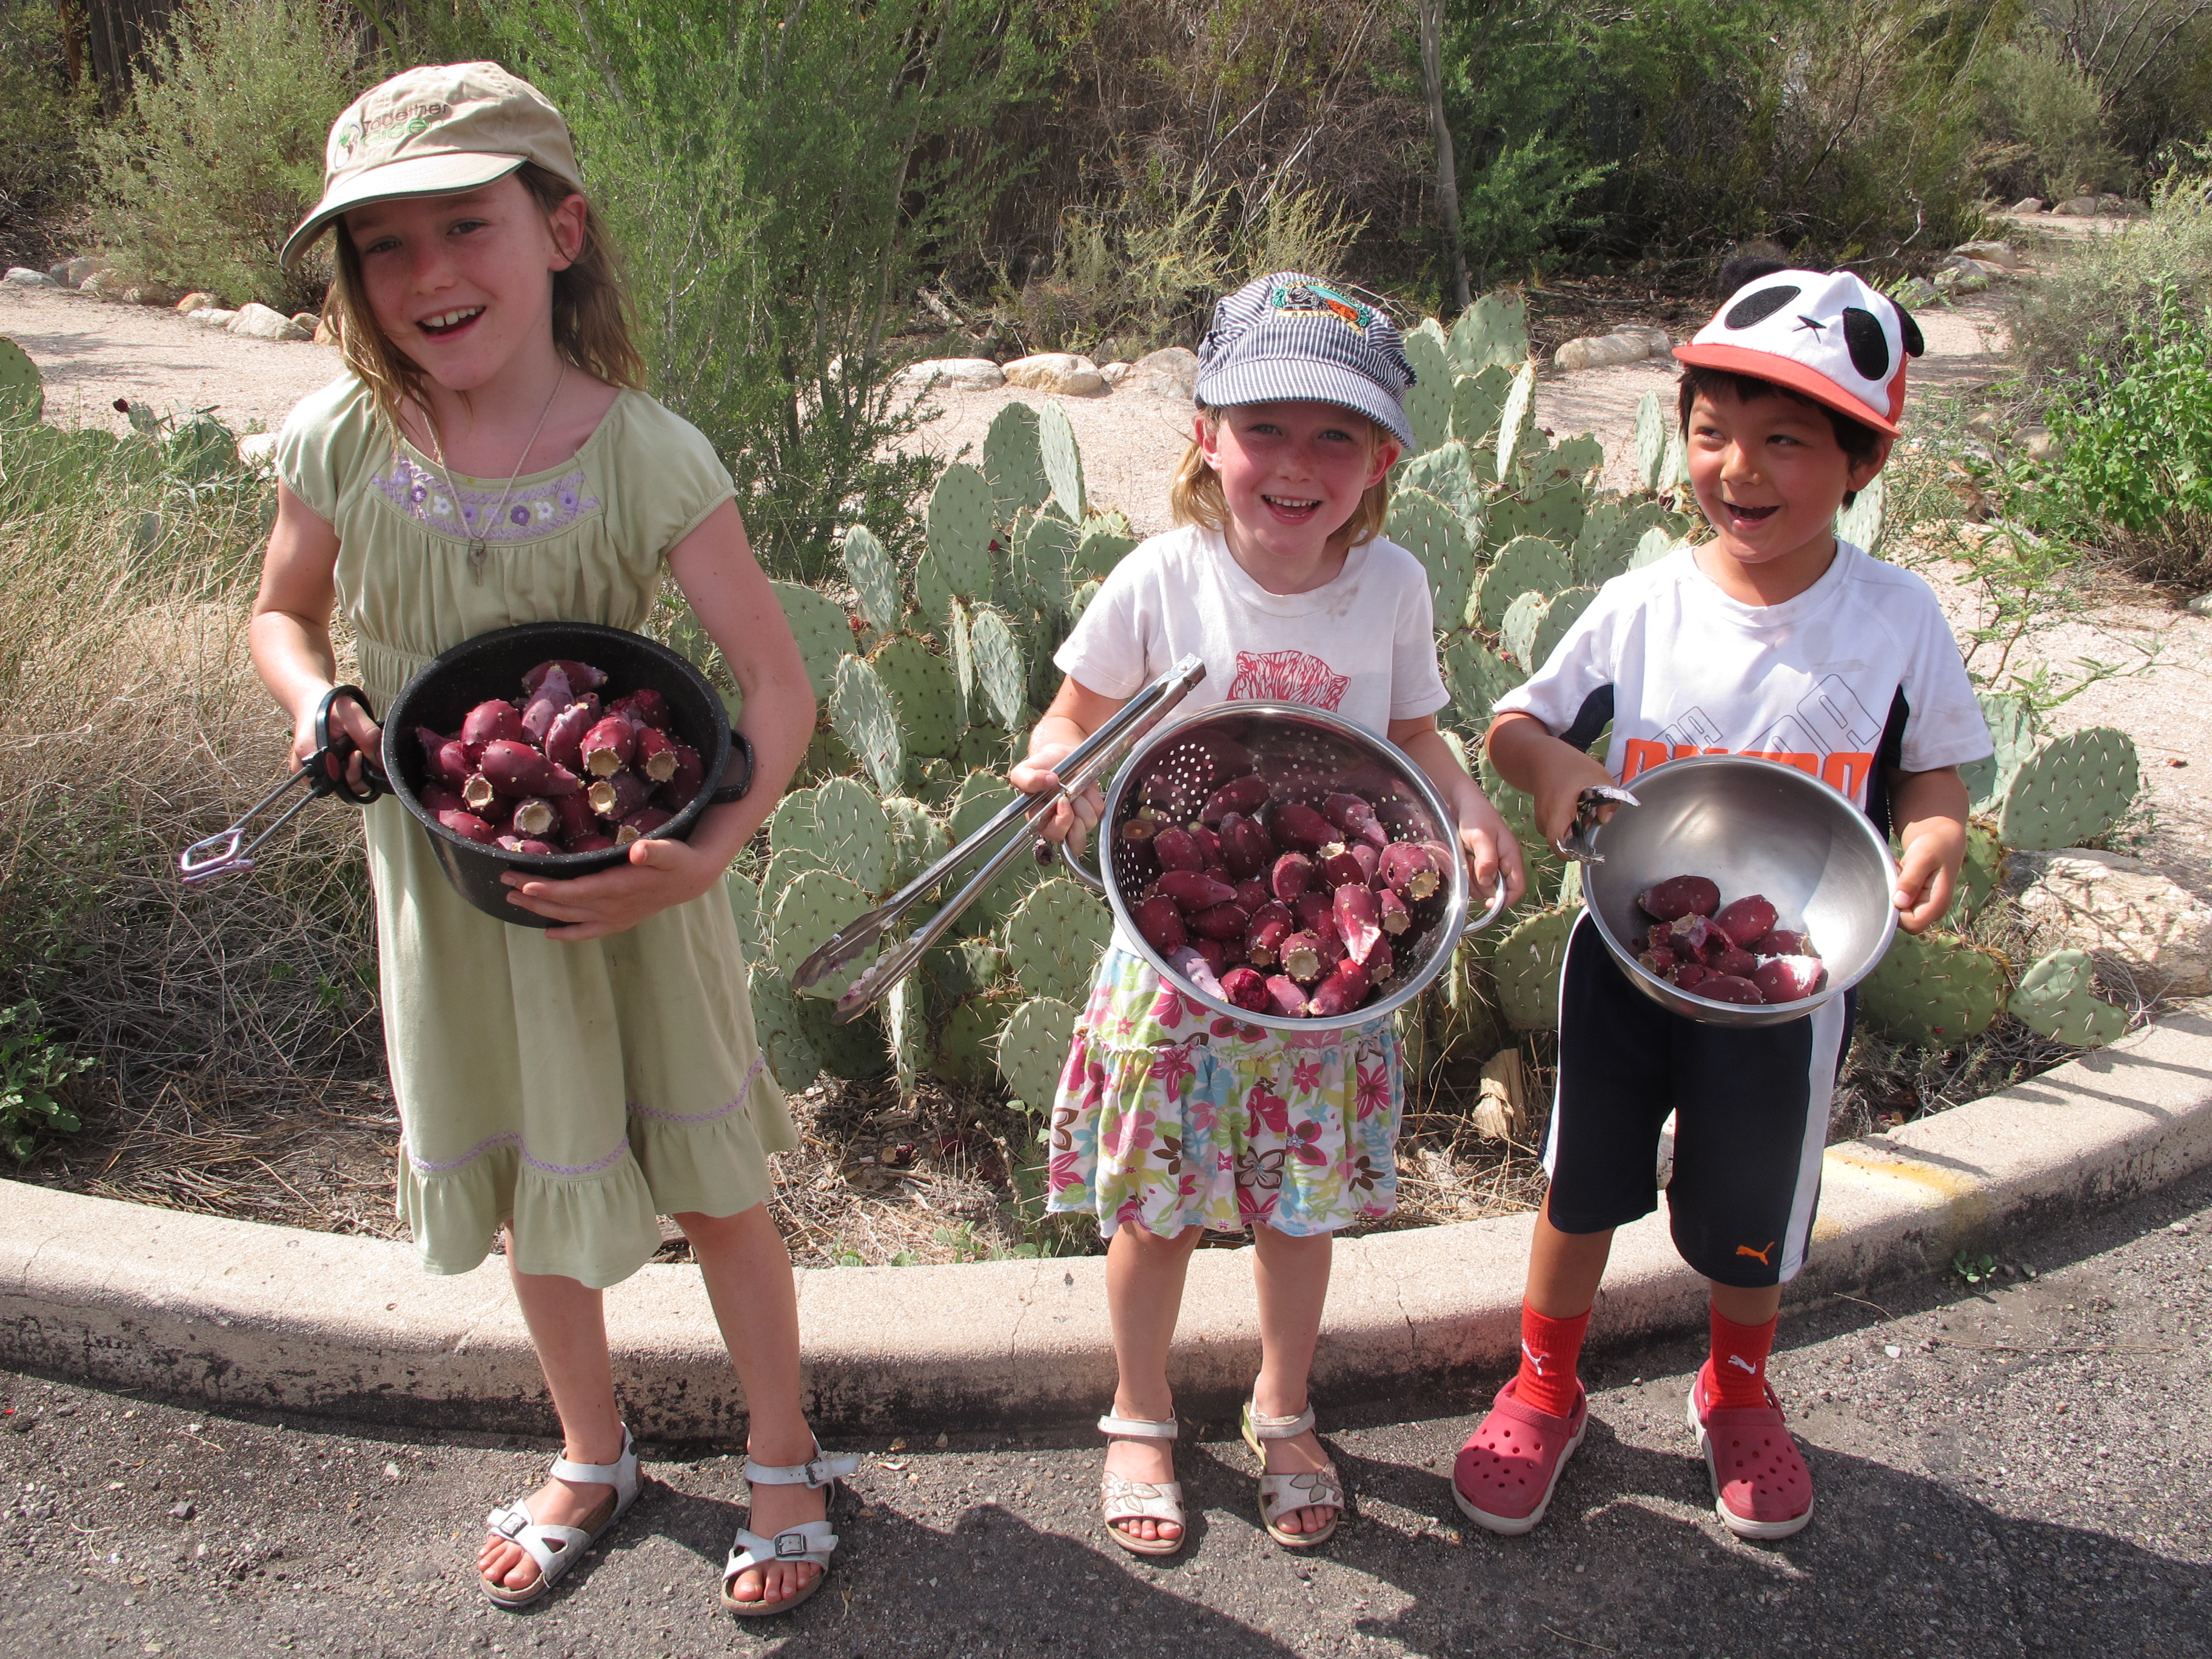 3 kids show off ripe prickly pear fruit harvest standing next to rainwater-harvesting basins with native plants